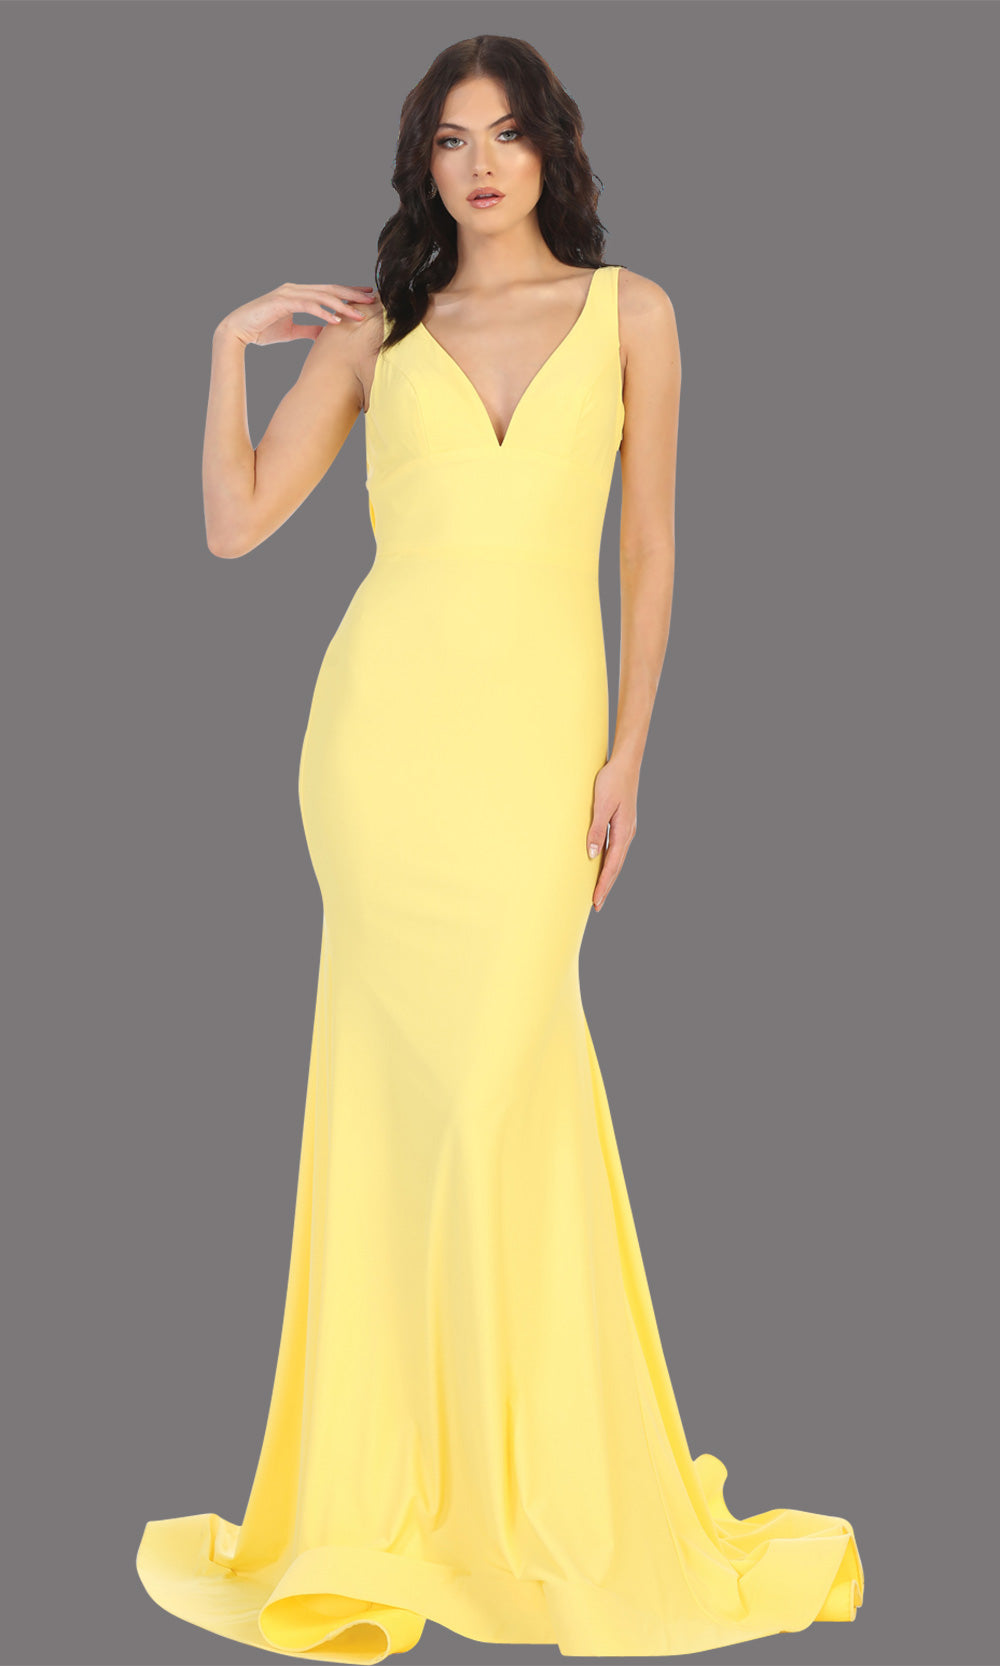 Mayqueen MQ1719 long sleek & sexy yellow dress w/ low v neck. This tight fitted mermaid dress w/low back. Yellow formal gown is perfect for prom, engagement/e-shoot dress, formal wedding guest dress, gala, black tie event.Plus sizes avail